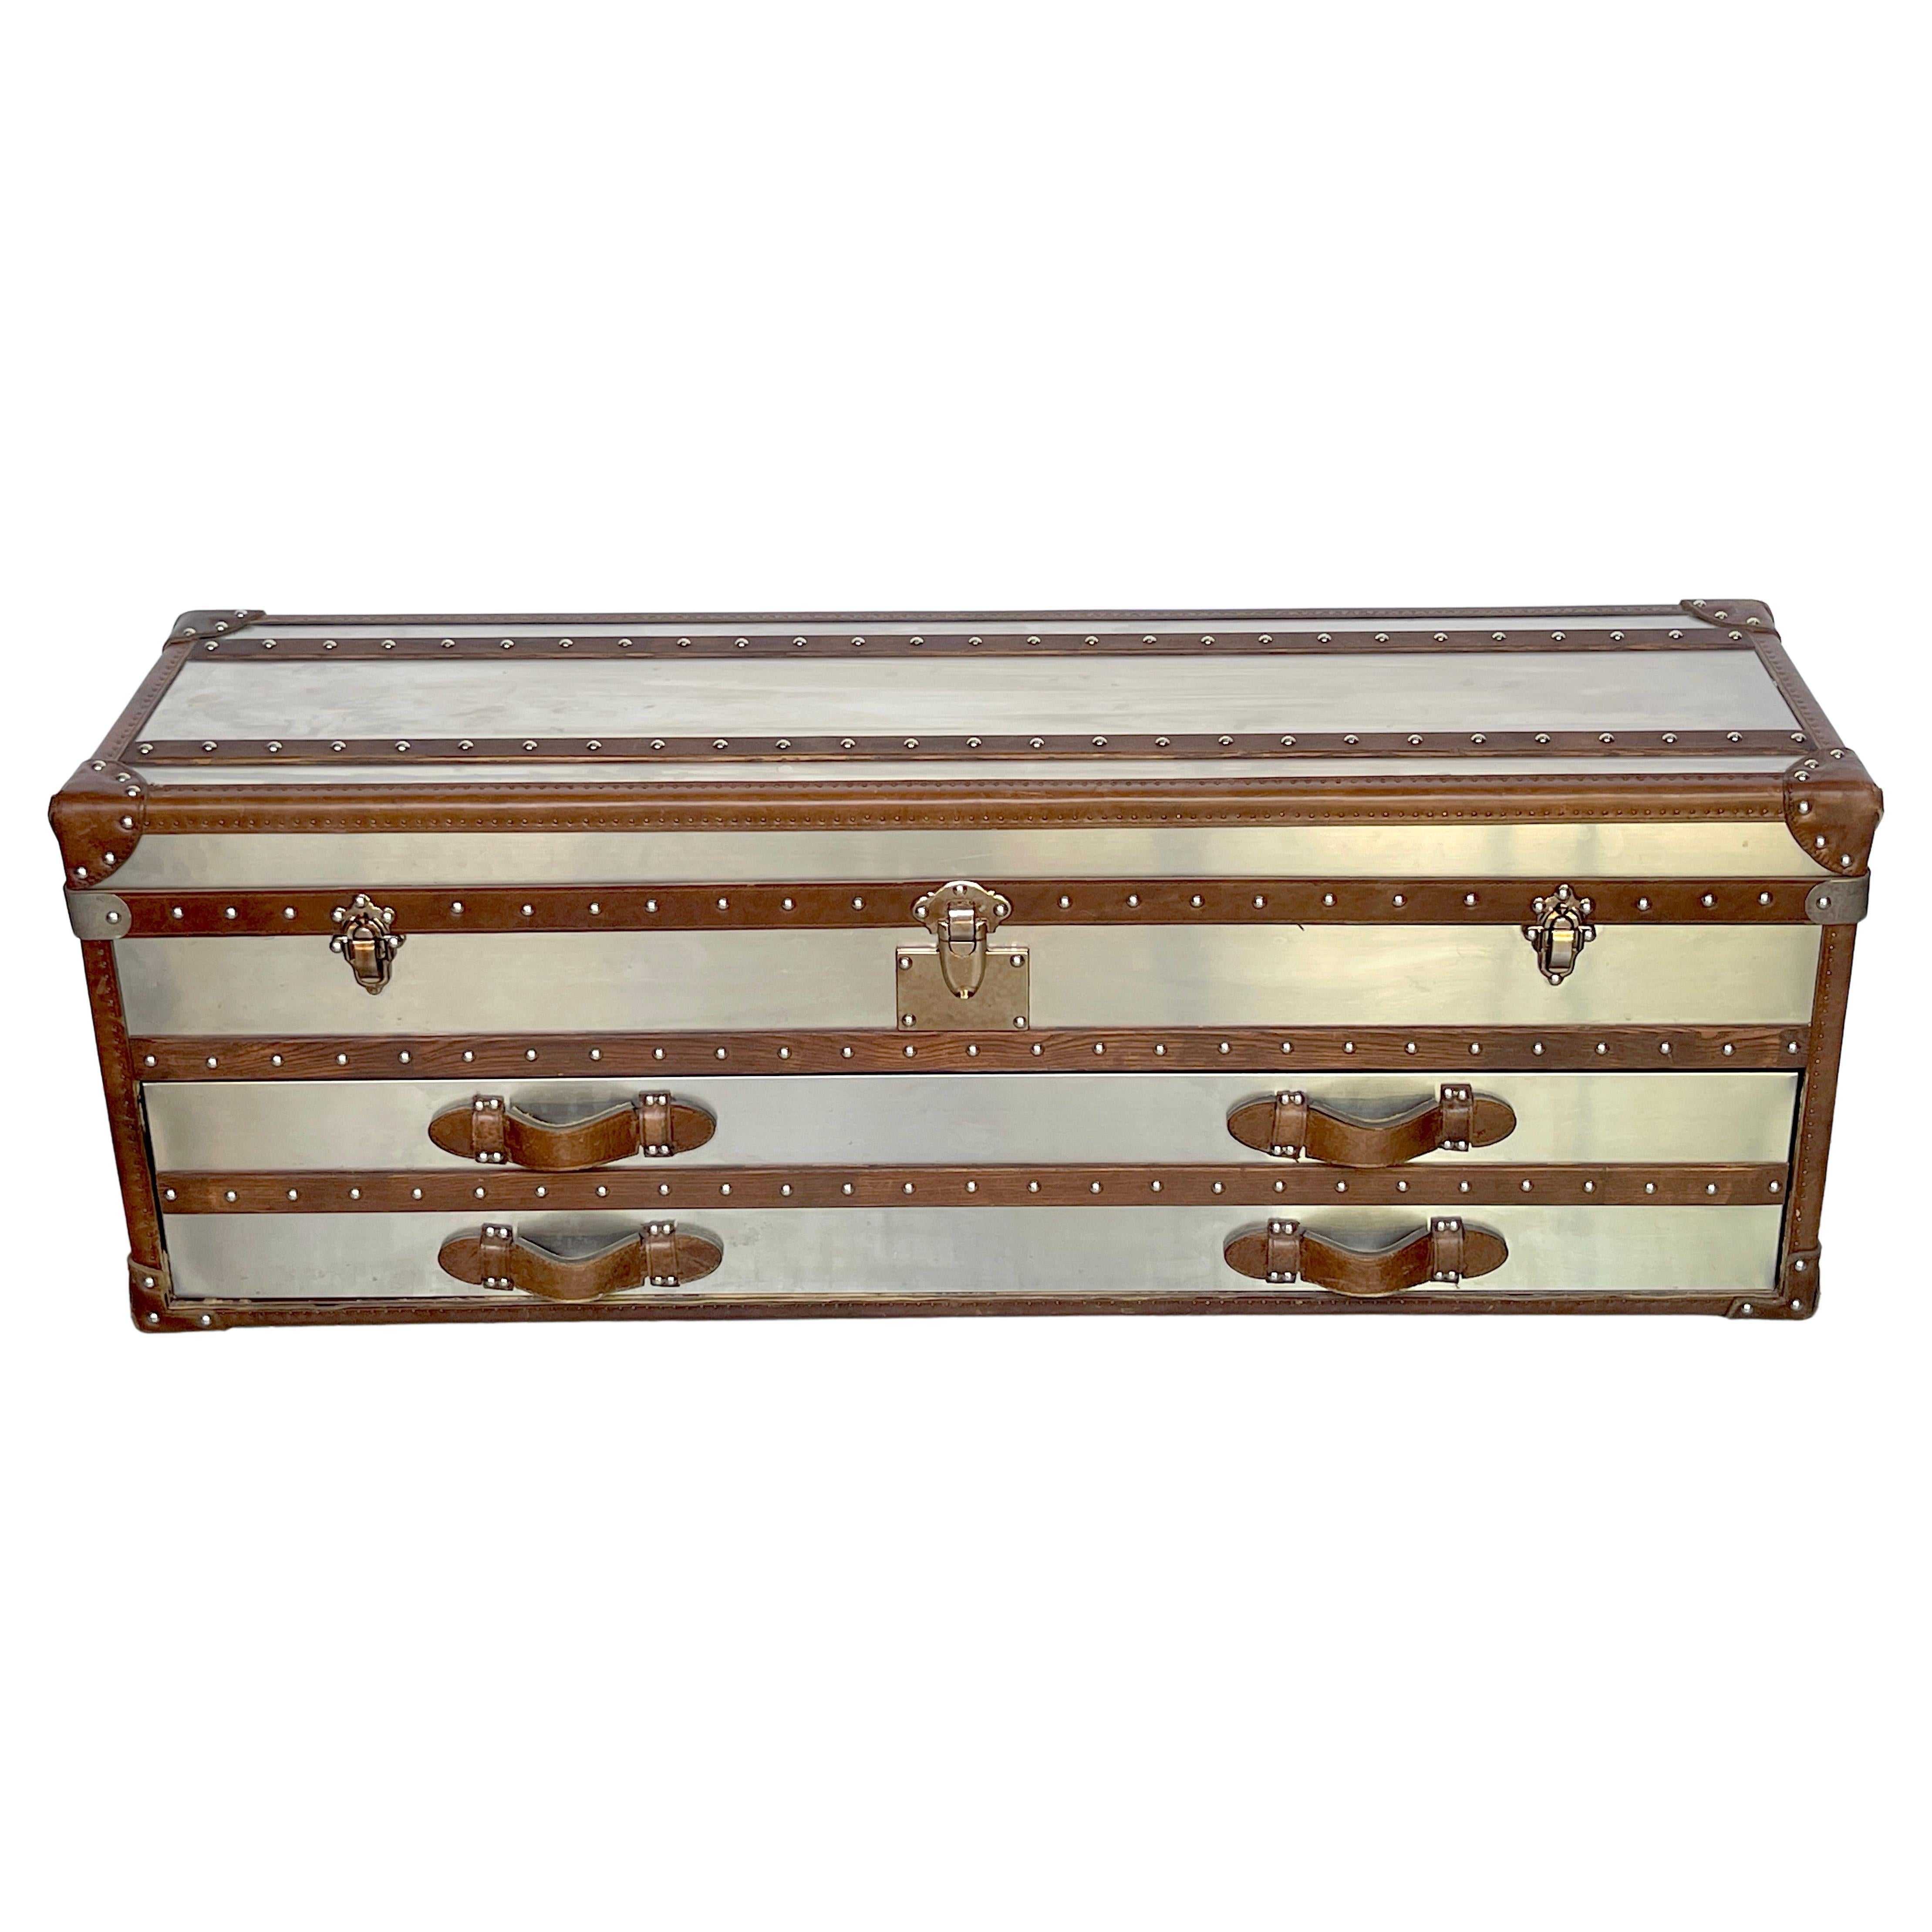 Restoration Hardware Coffee /Table Mayfair Steamer Trunk 
Discontinued, edition from 2000s

We are please to offer a rare find by  Restoration Hardware the Mayfair steamer trunk/ chest/ coffee table. 

A discontinued edition from the 2000s. This